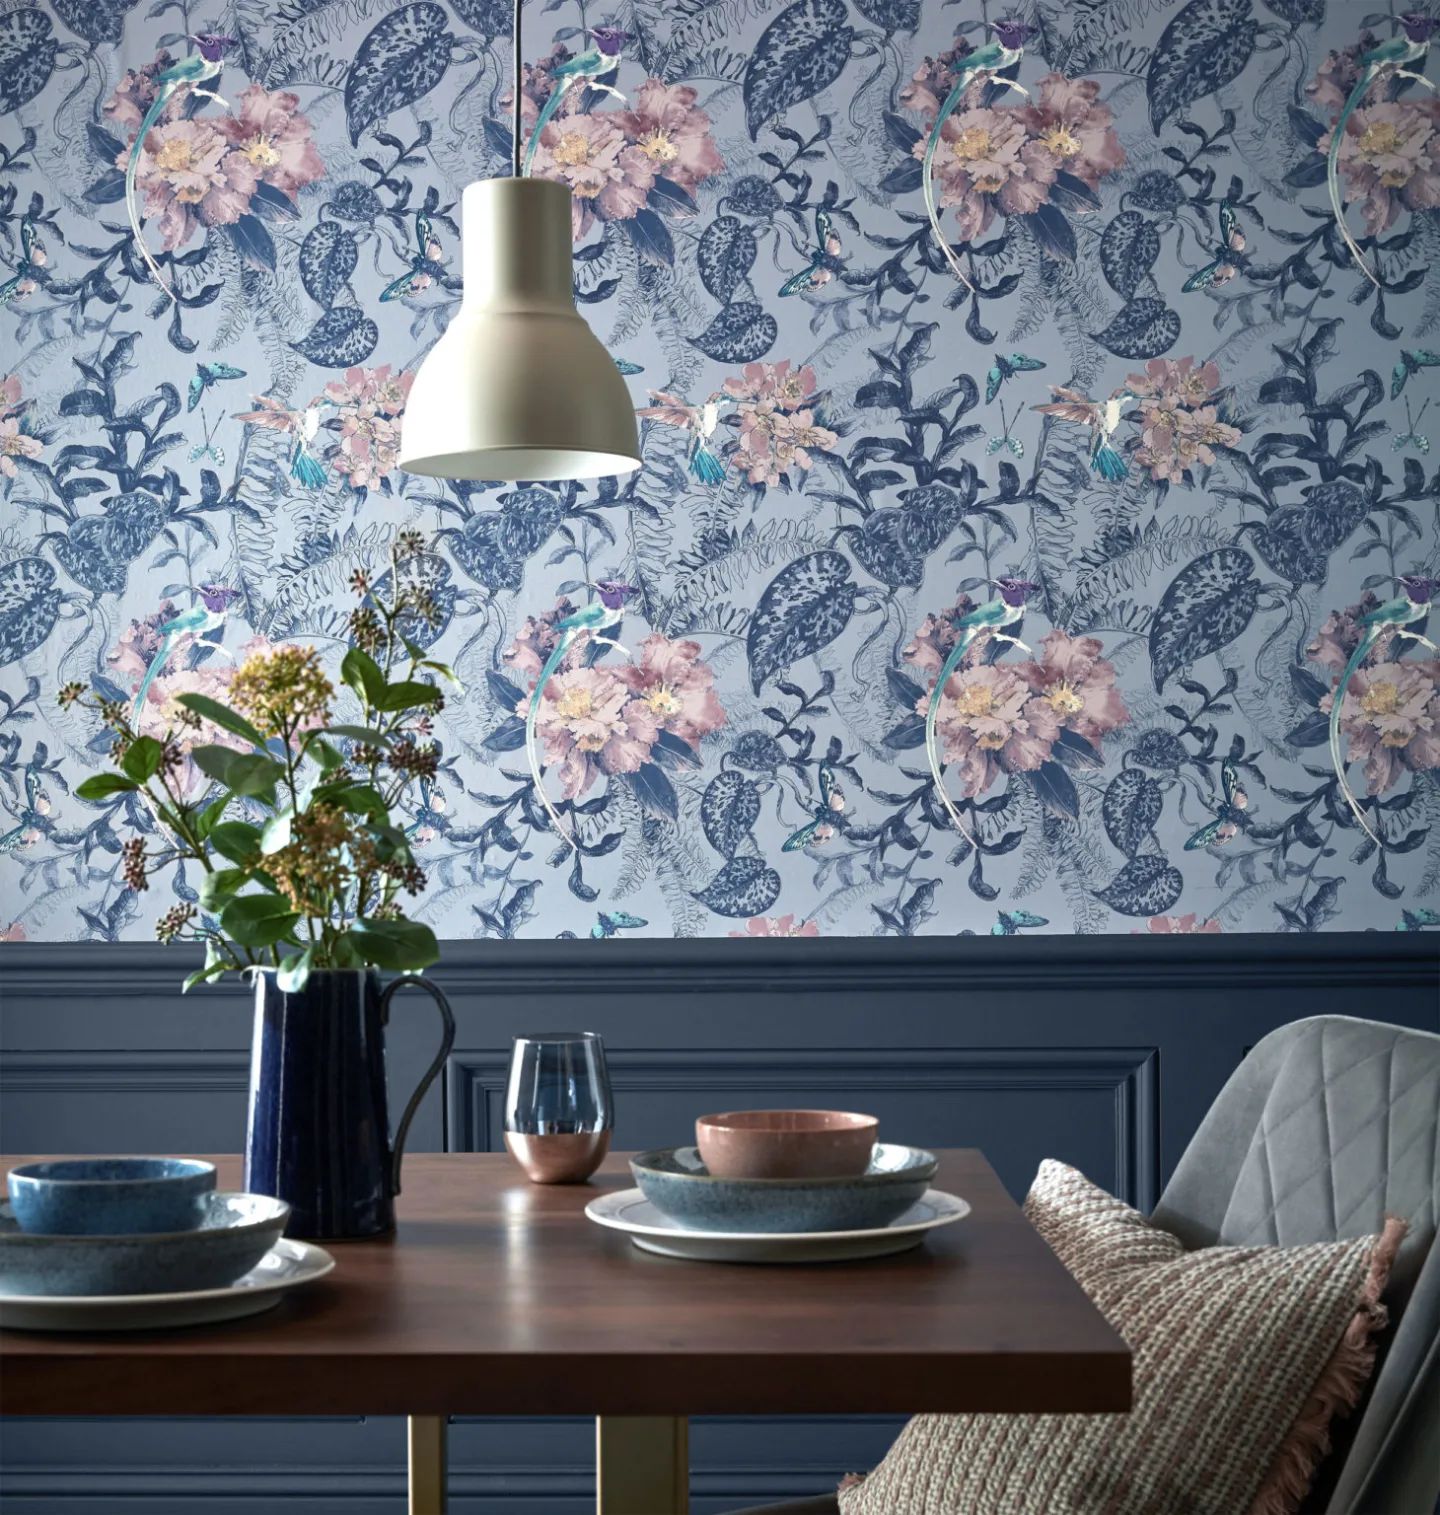 Hedgeroe Wallpaper by @1838_wallcoverings in 🌺 Blue Dusk

A very exotic hedgerow with humming birds, ferns, butterflies and poppy and dog rose flowers, drawn in a pen and ink style with colour highlights set against a dusky blue background. 

Available to order today in-store and online at stillorgandecor.ie for delivery nationwide.